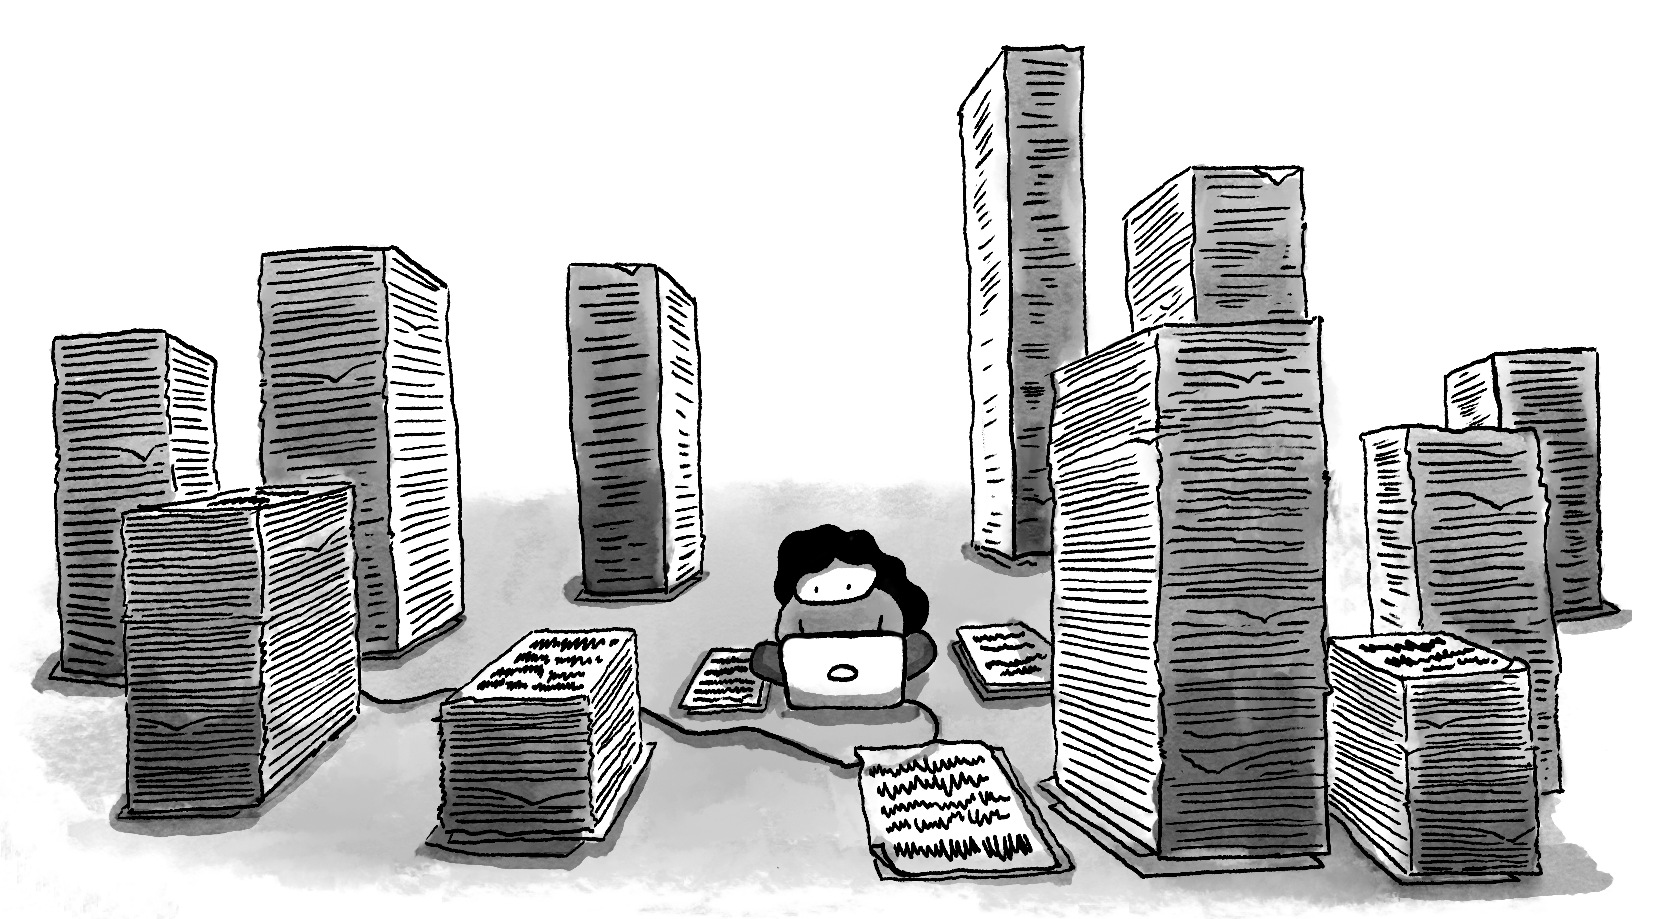 Drawing of young person sitting on the floor with a laptop, surrounded by tall stacks of paper.